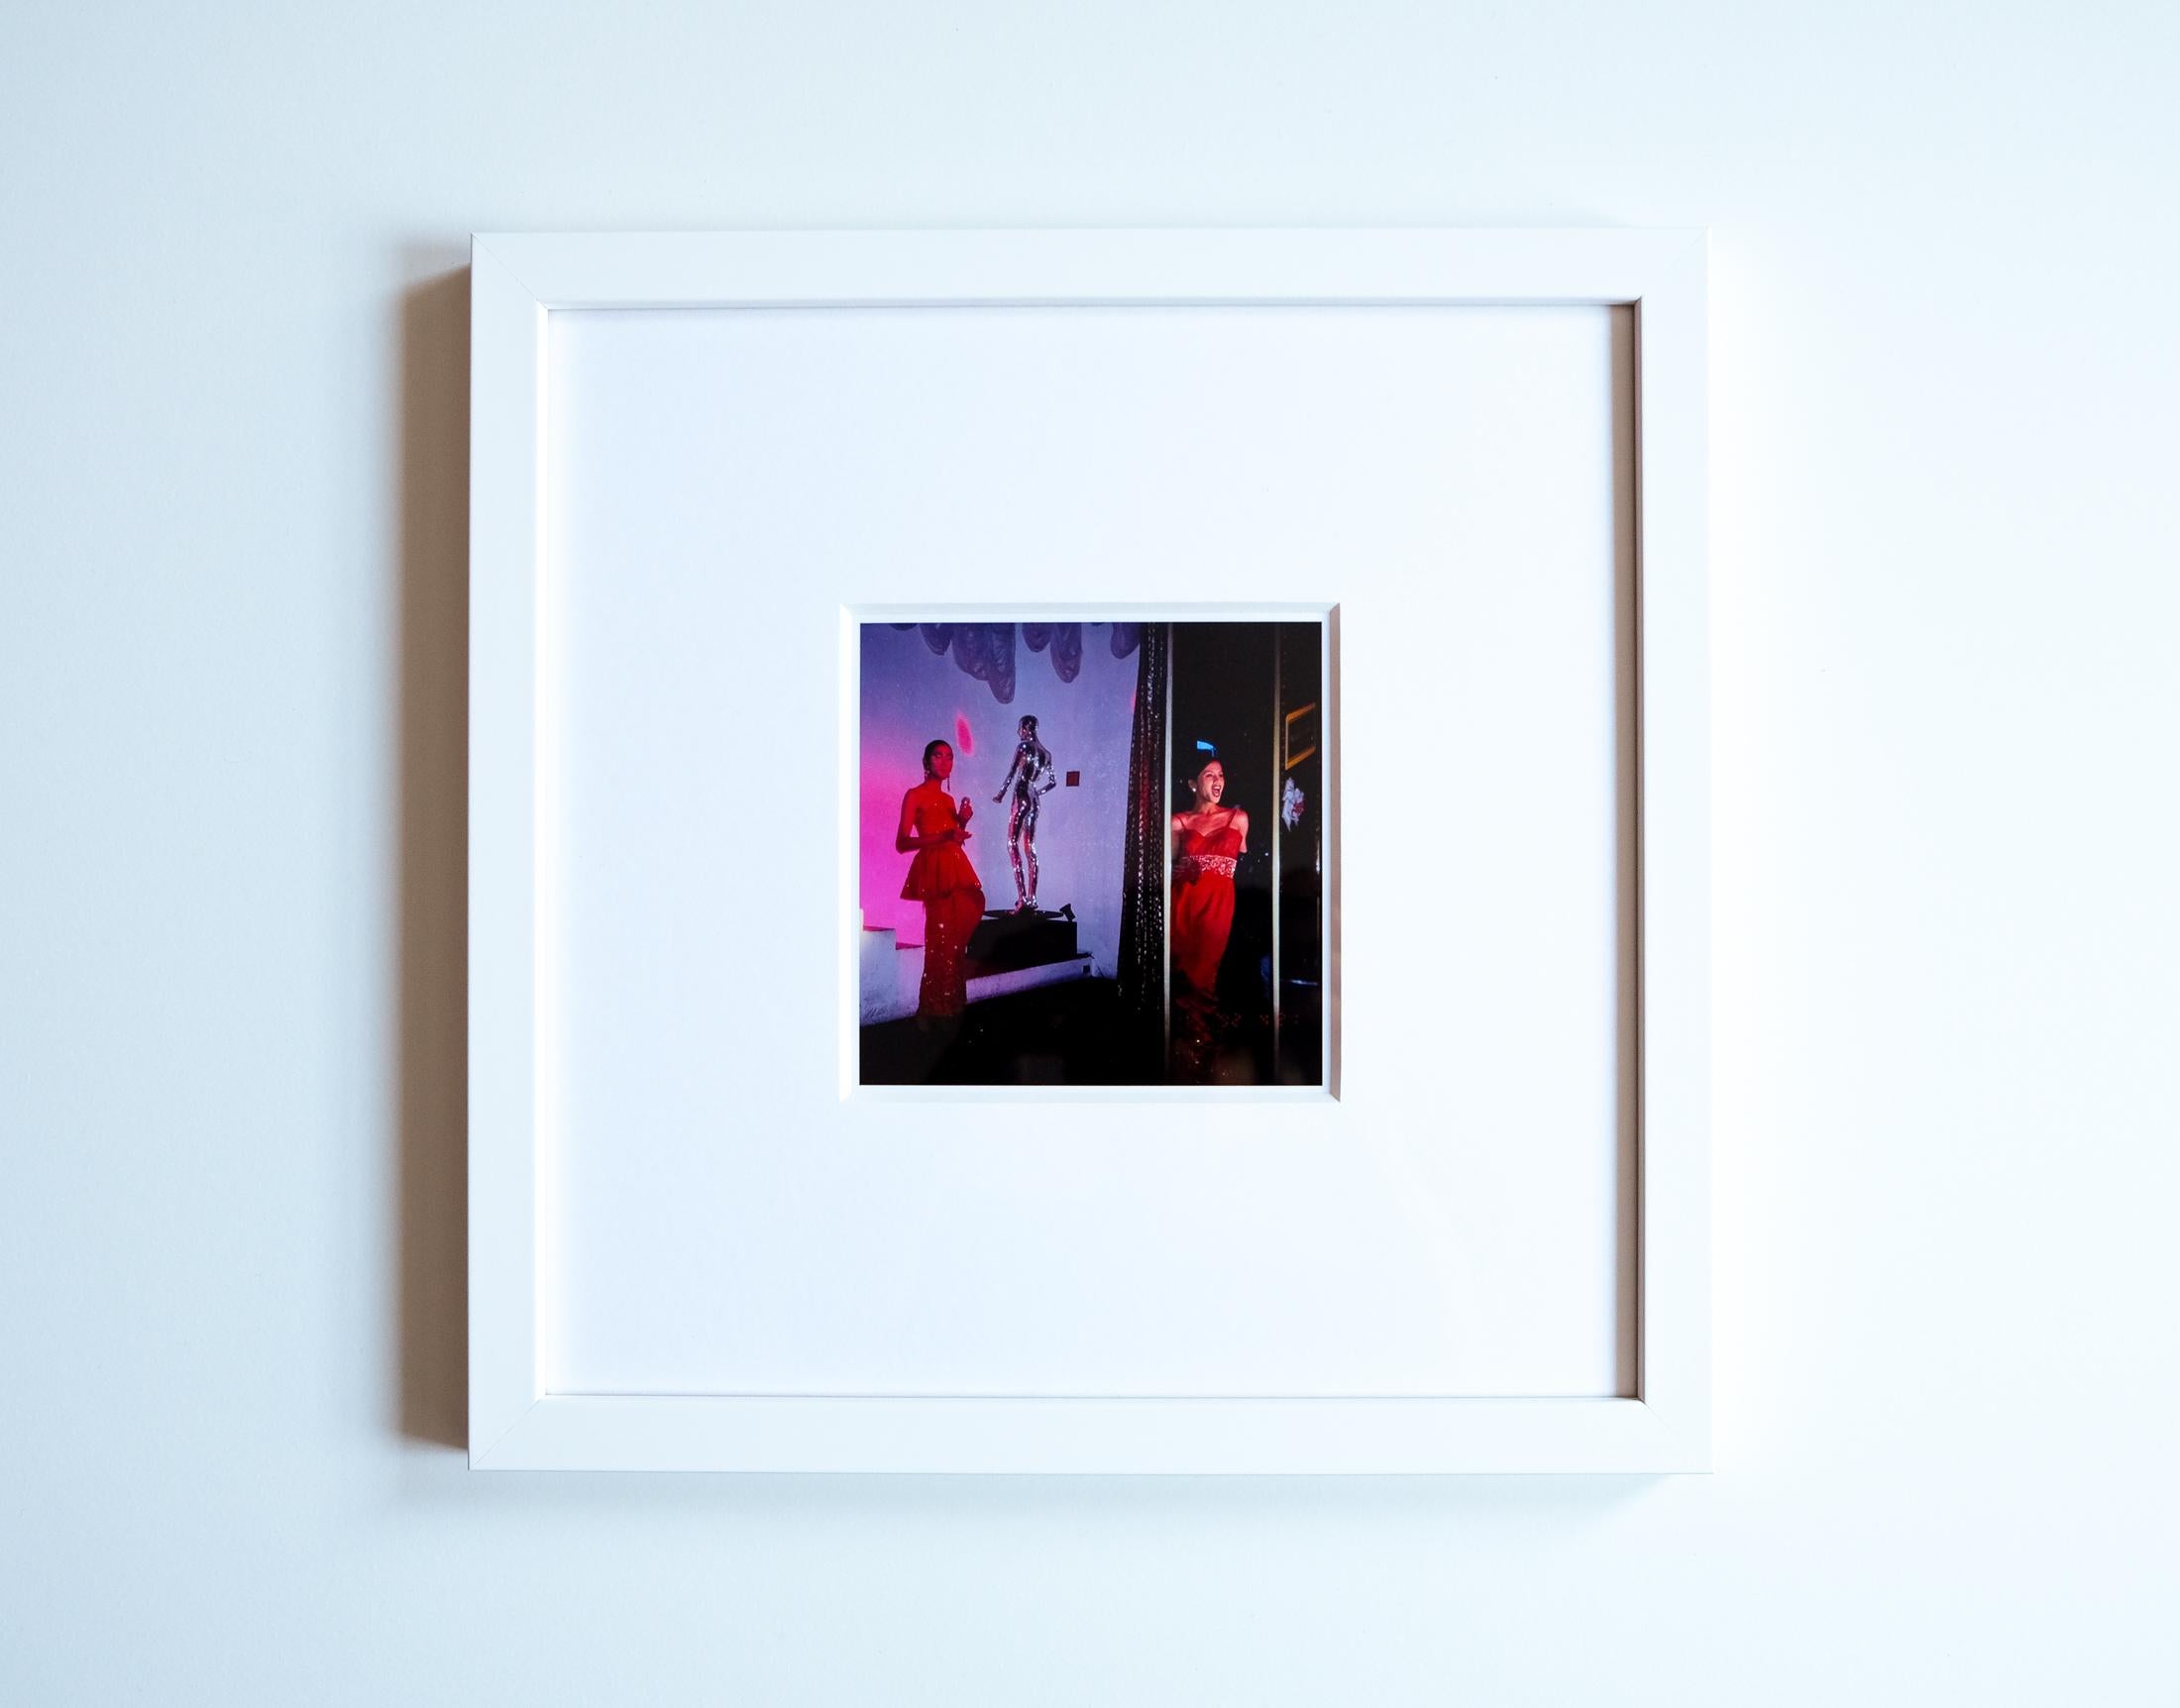 For sale an original signed museum-quality Magnum/Aperture 6x6 photographic print by renowned American artist NAN GOLDIN.

Titled 